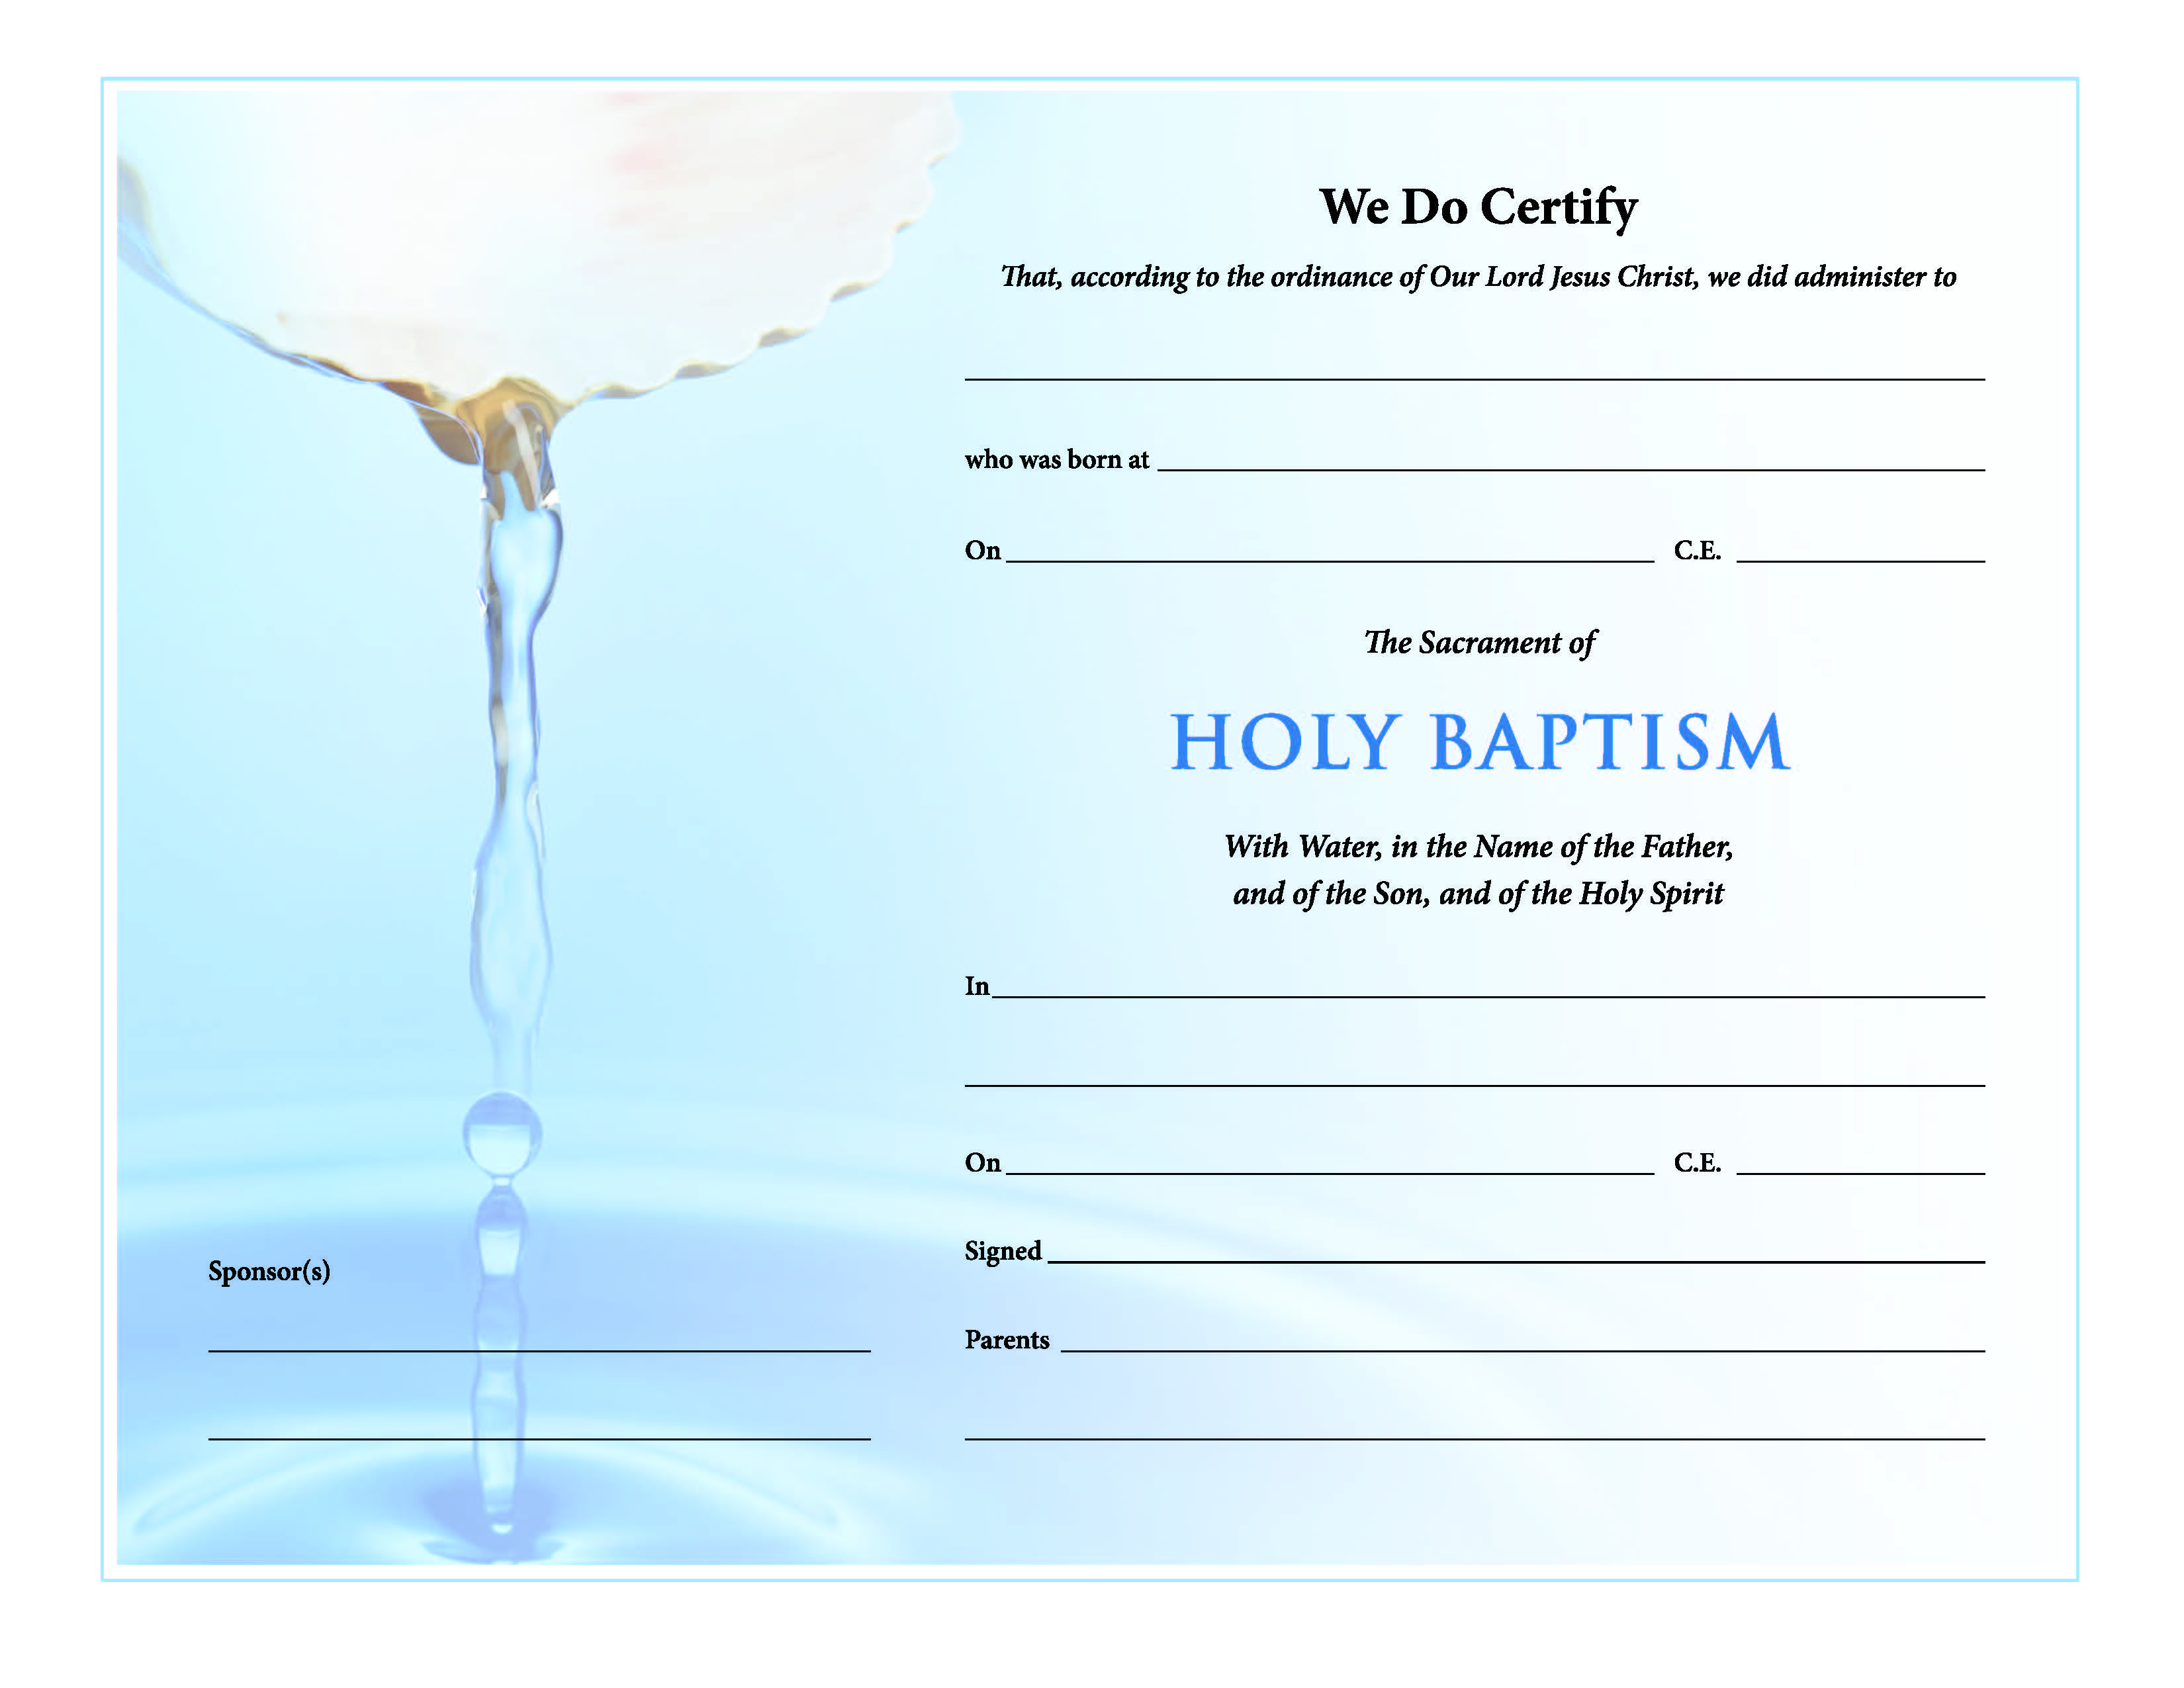 ChurchPublishing.org: Holy Baptism Certificate - Download With Regard To Baptism Certificate Template Download